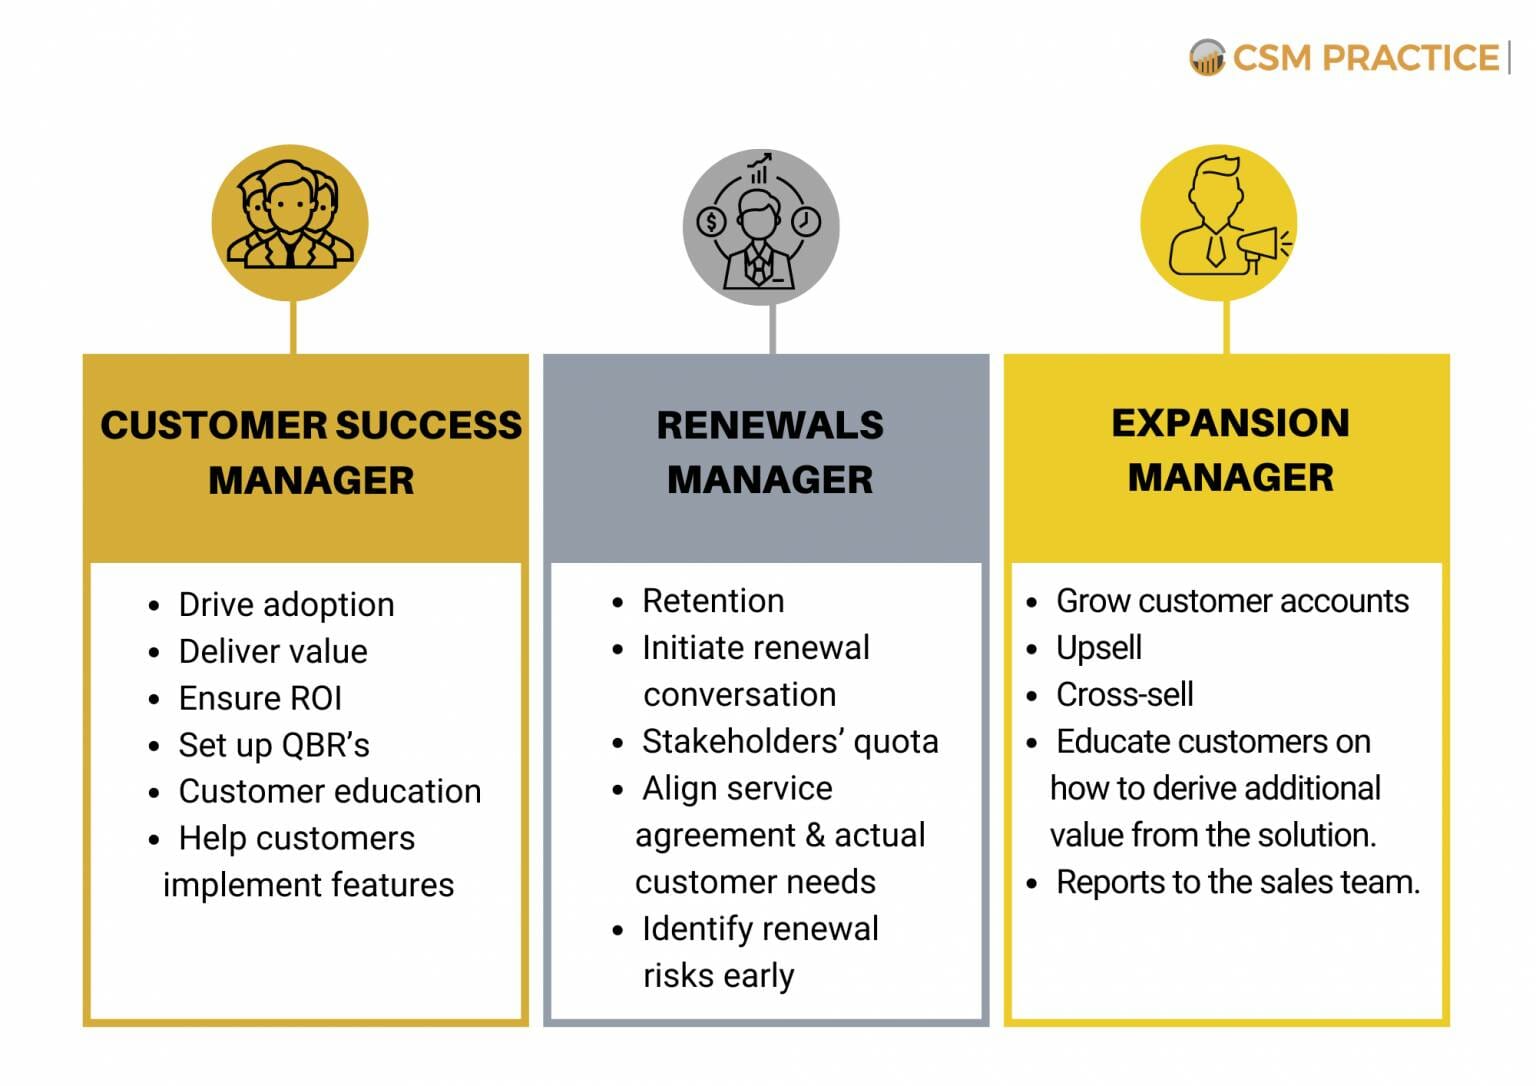 How to Scale the Customer Renewal Process Effectively